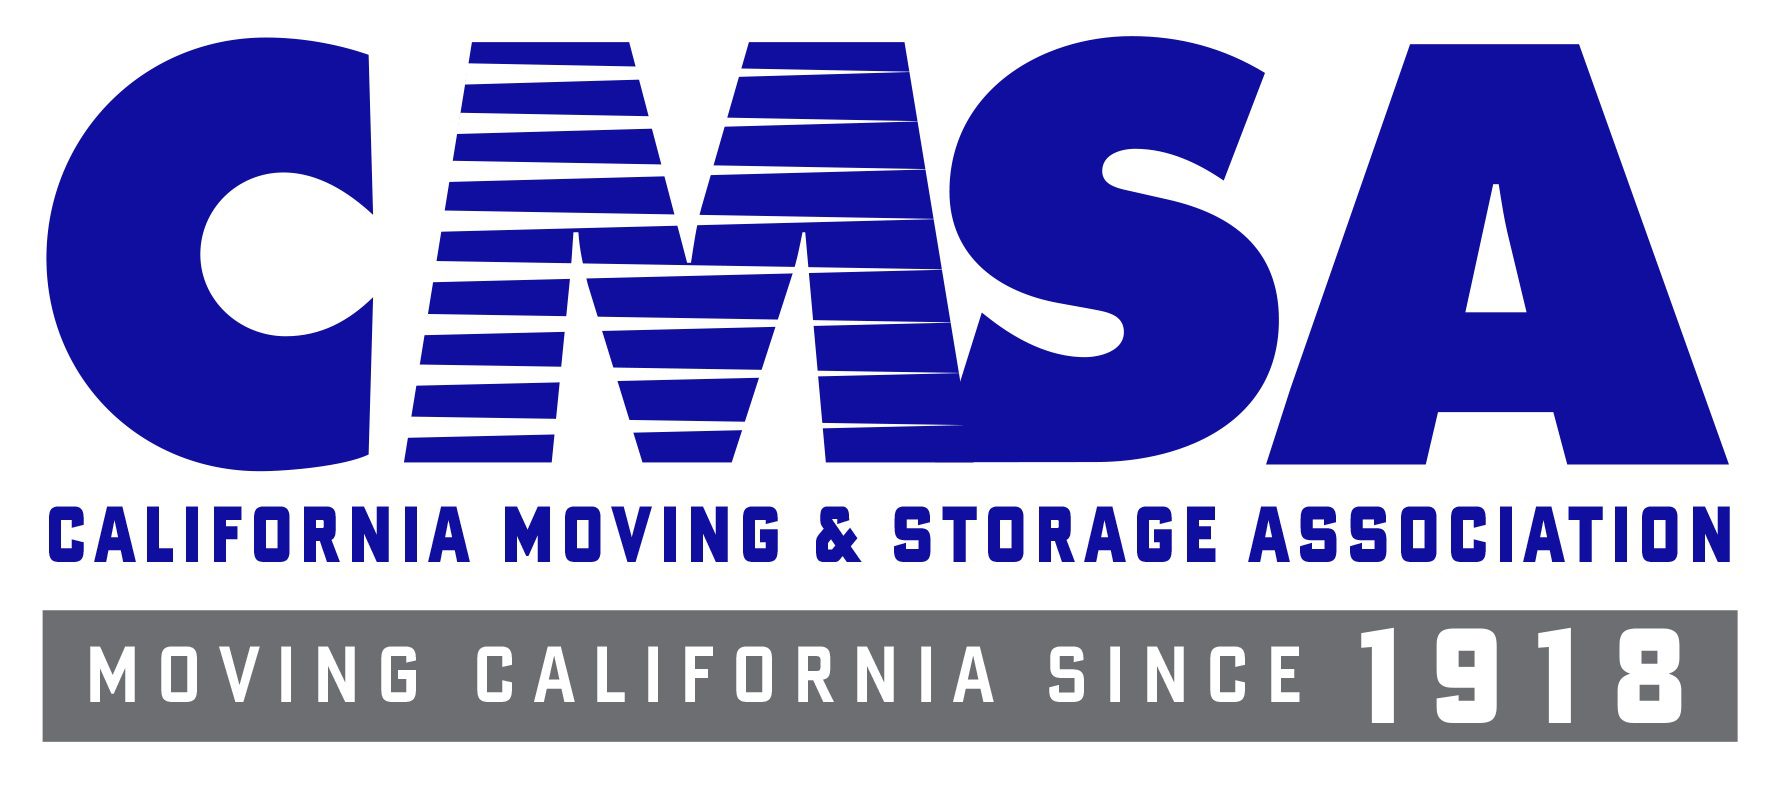 A moving and storage association logo